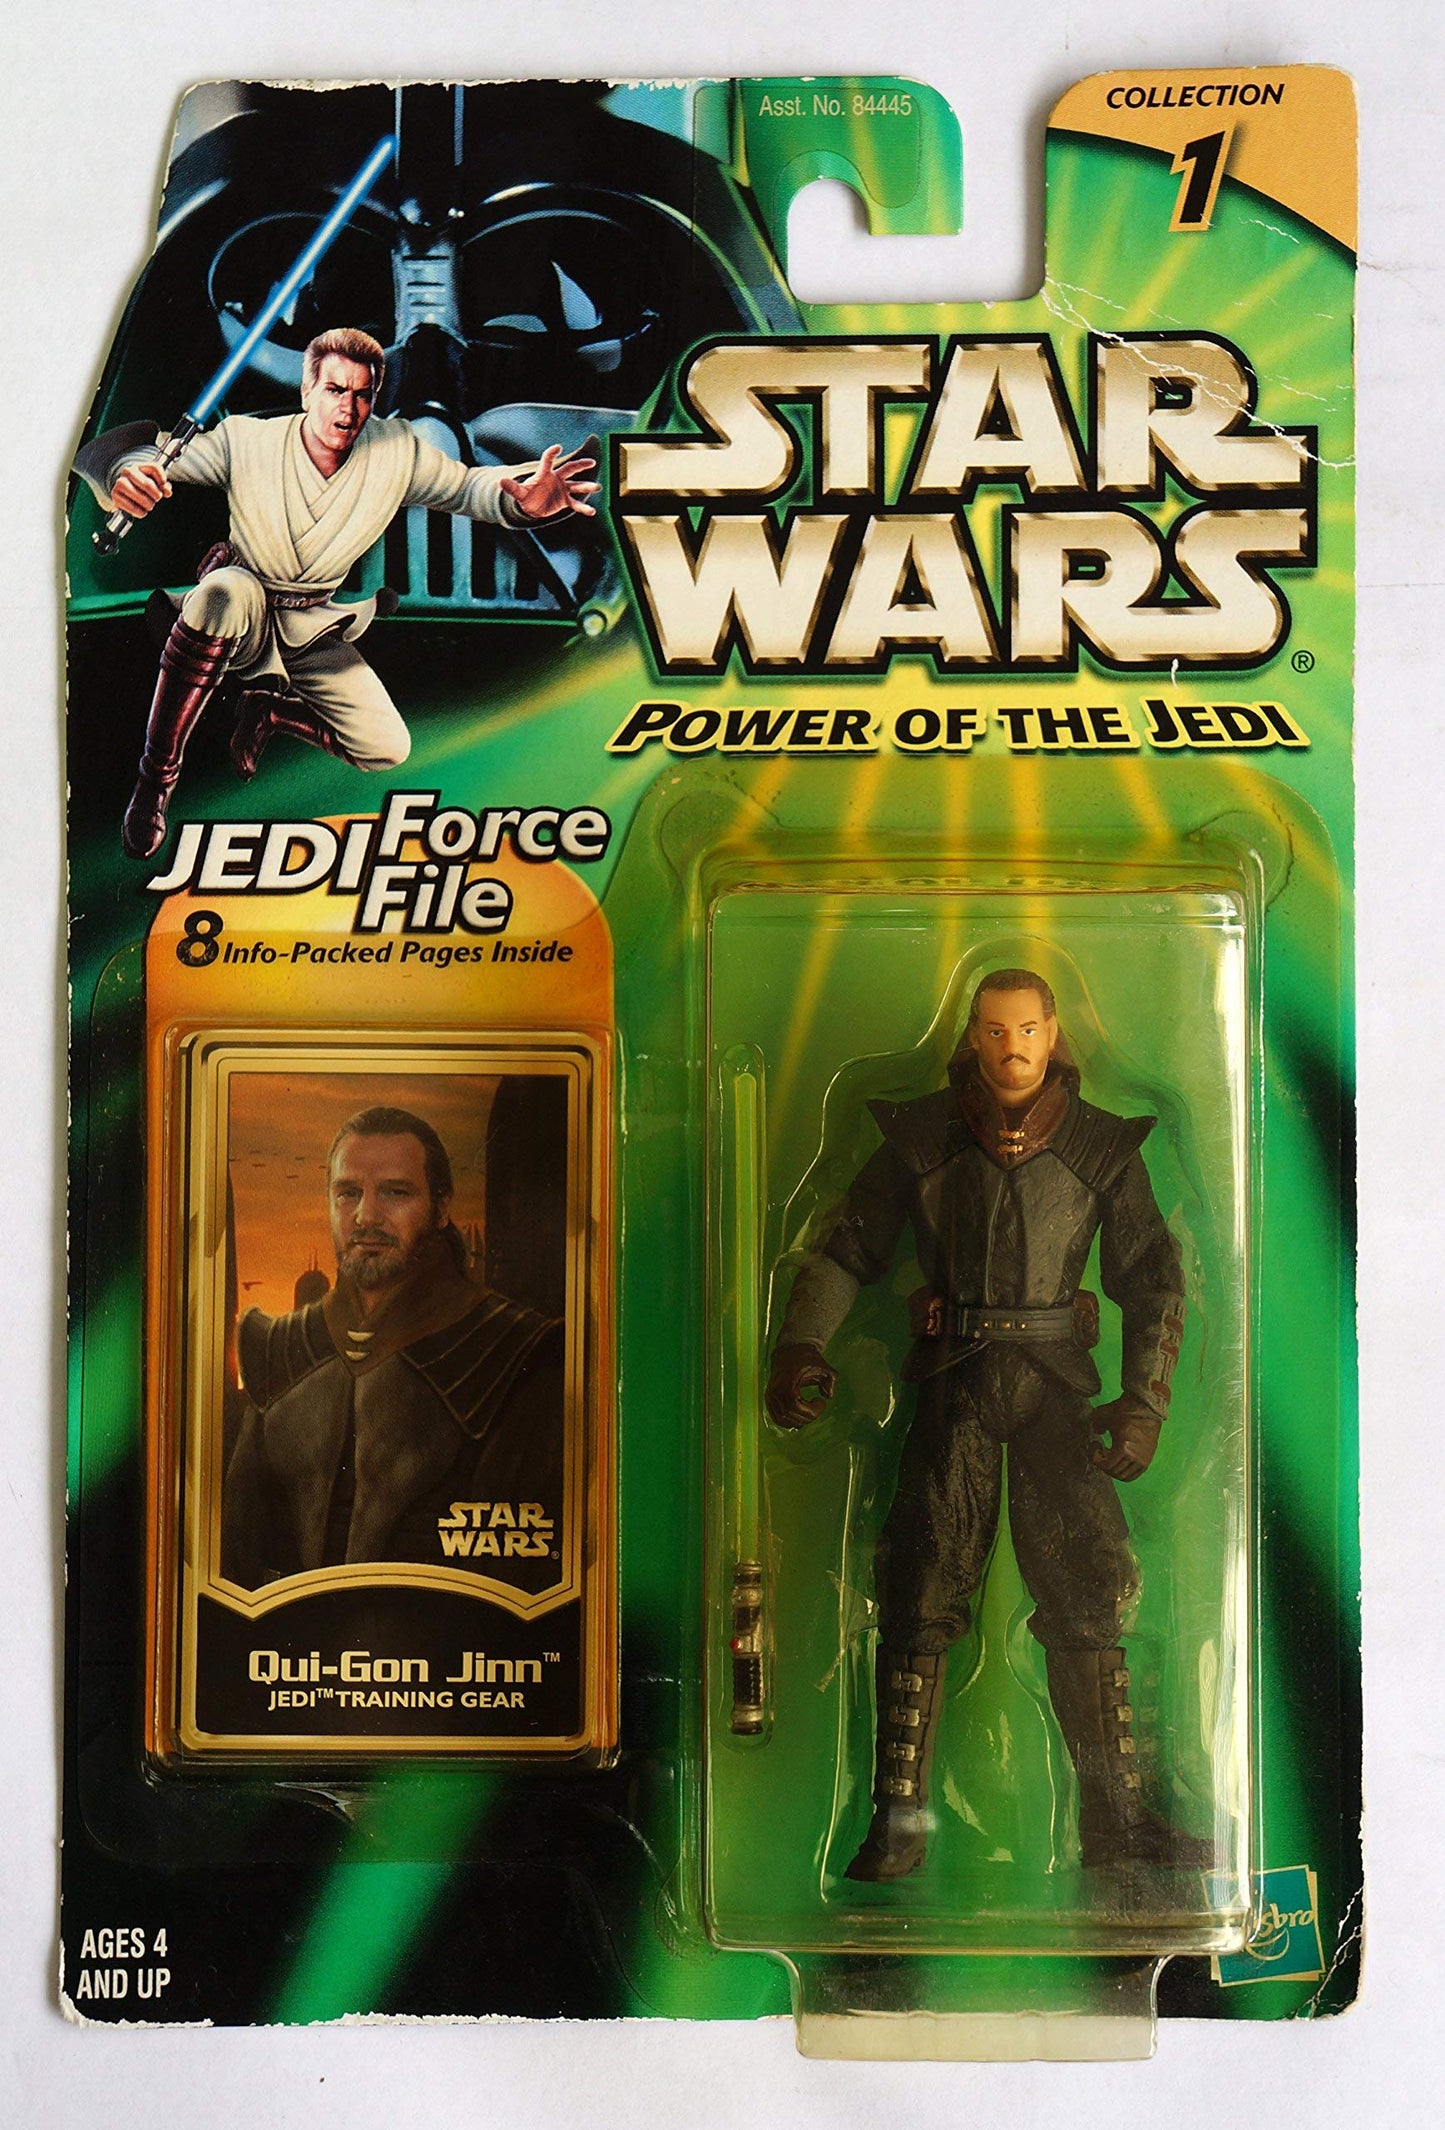 Vintage 2000 Star Wars Power Of The Jedi Collection 1 Qui-Gon Jinn Jedi Training Gear Action Figure - Brand New Factory Sealed Shop Stock Room FindShop Stock Room Find